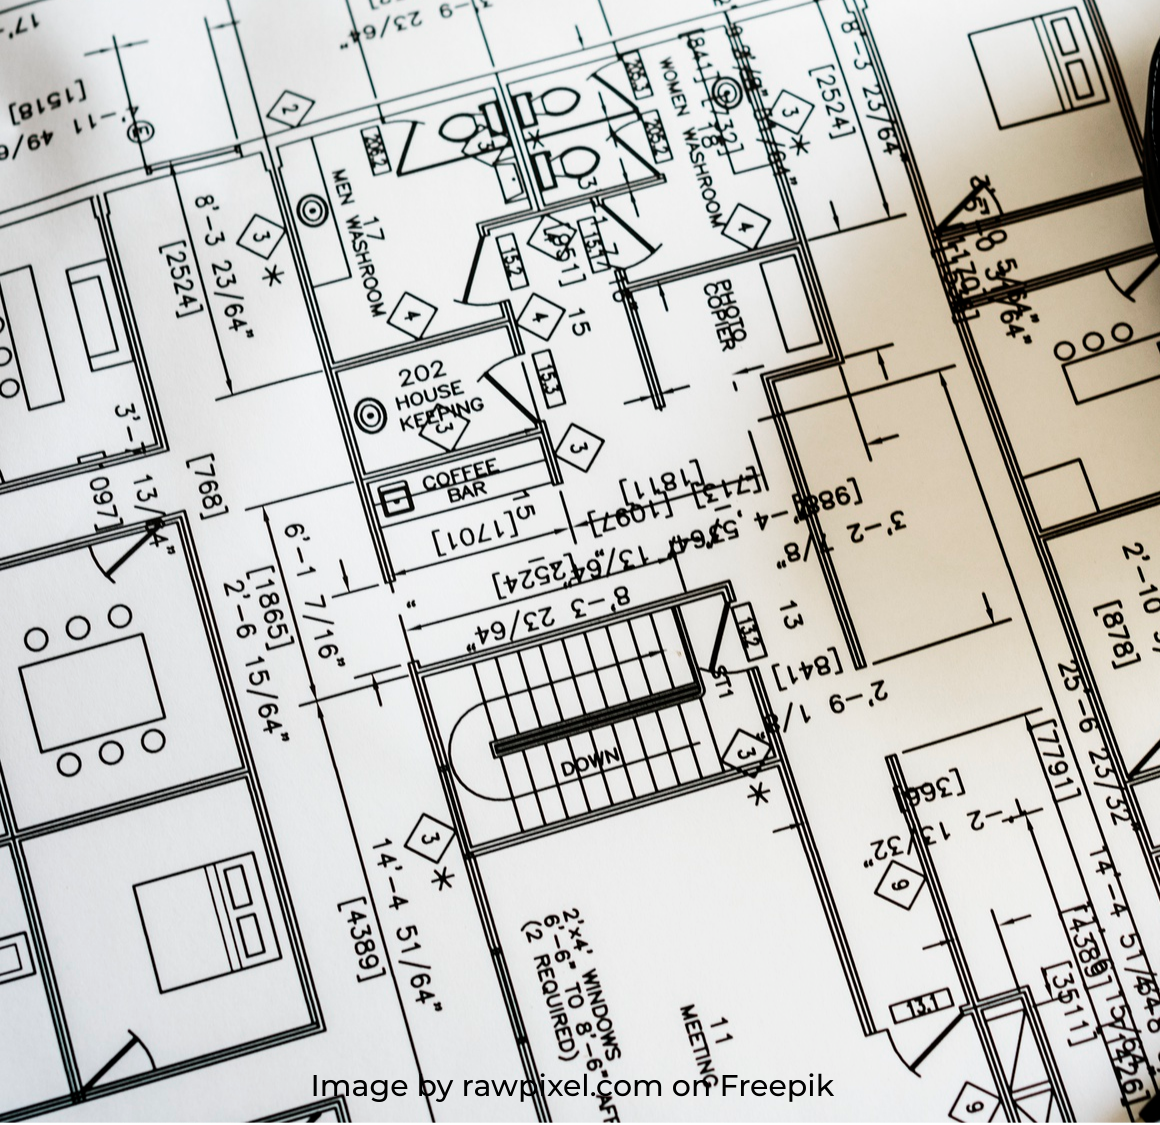 Step 4: Obtaining Permitted Construction Drawings